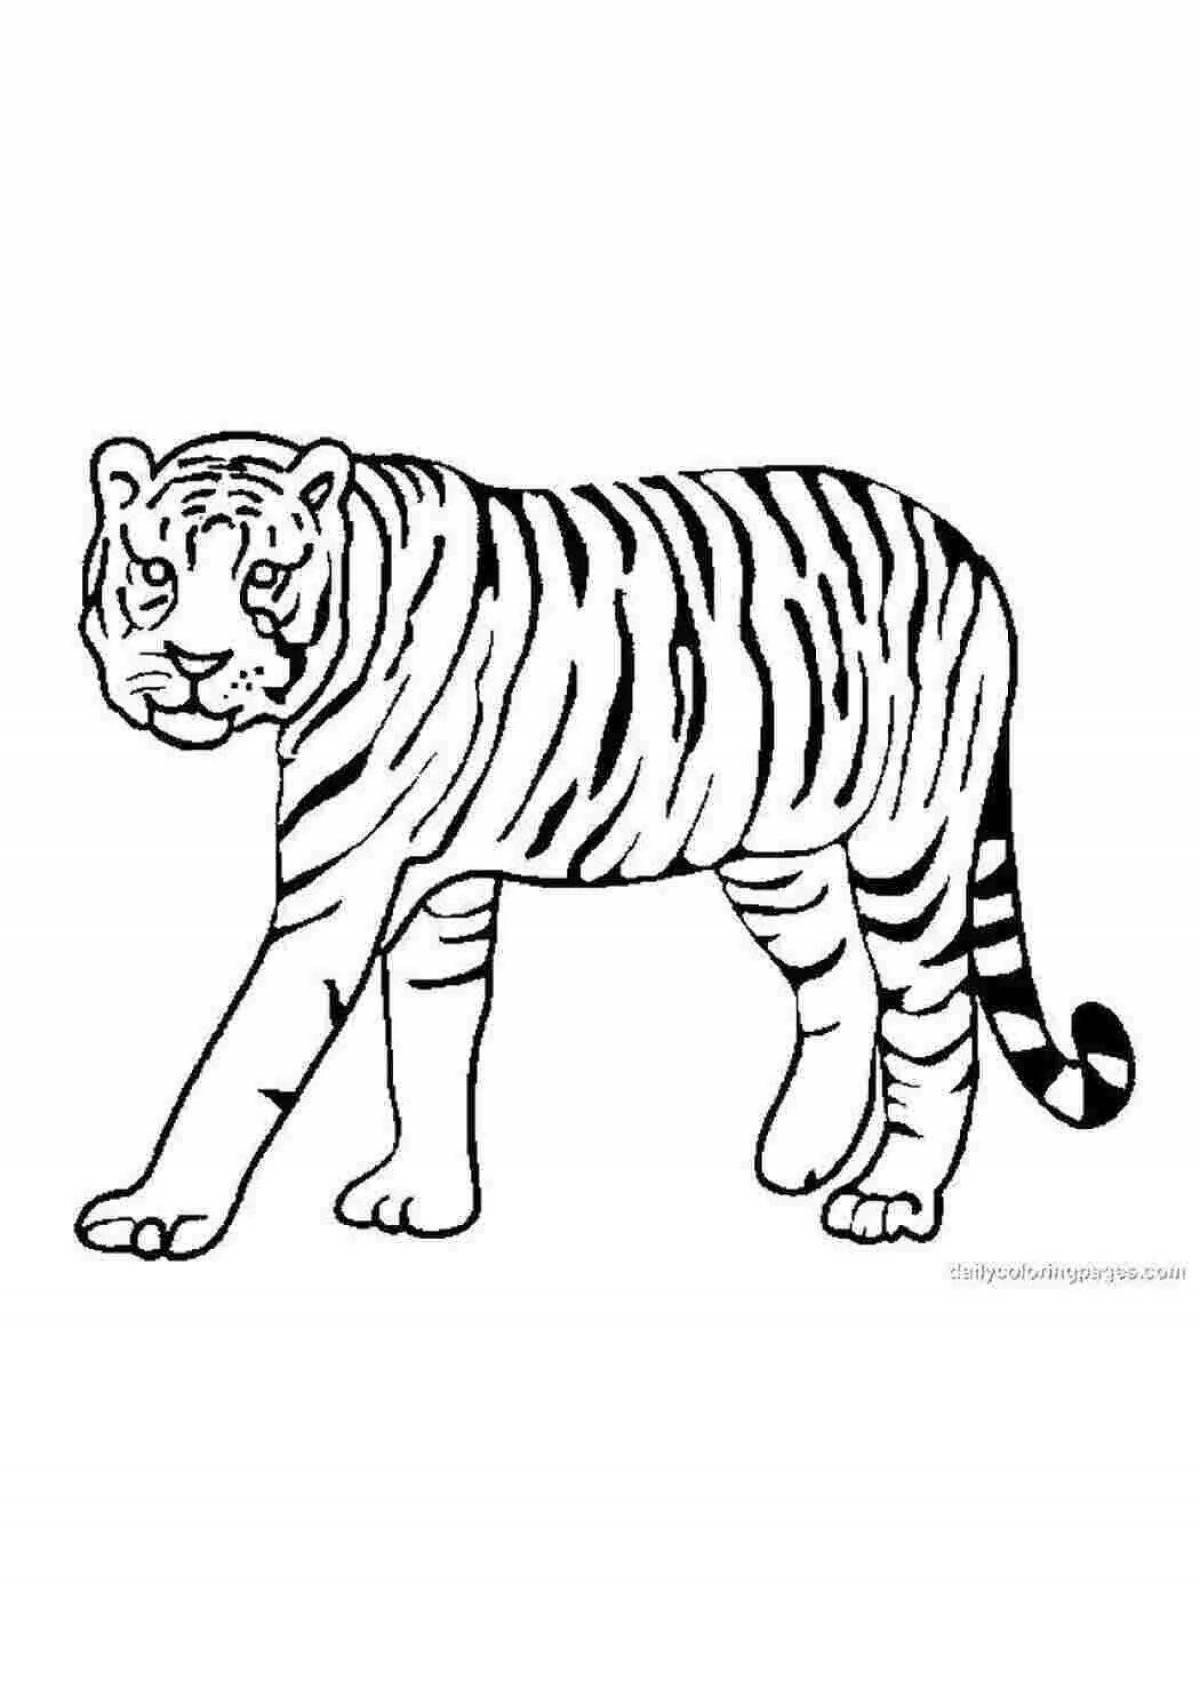 Adorable Siberian tiger coloring page